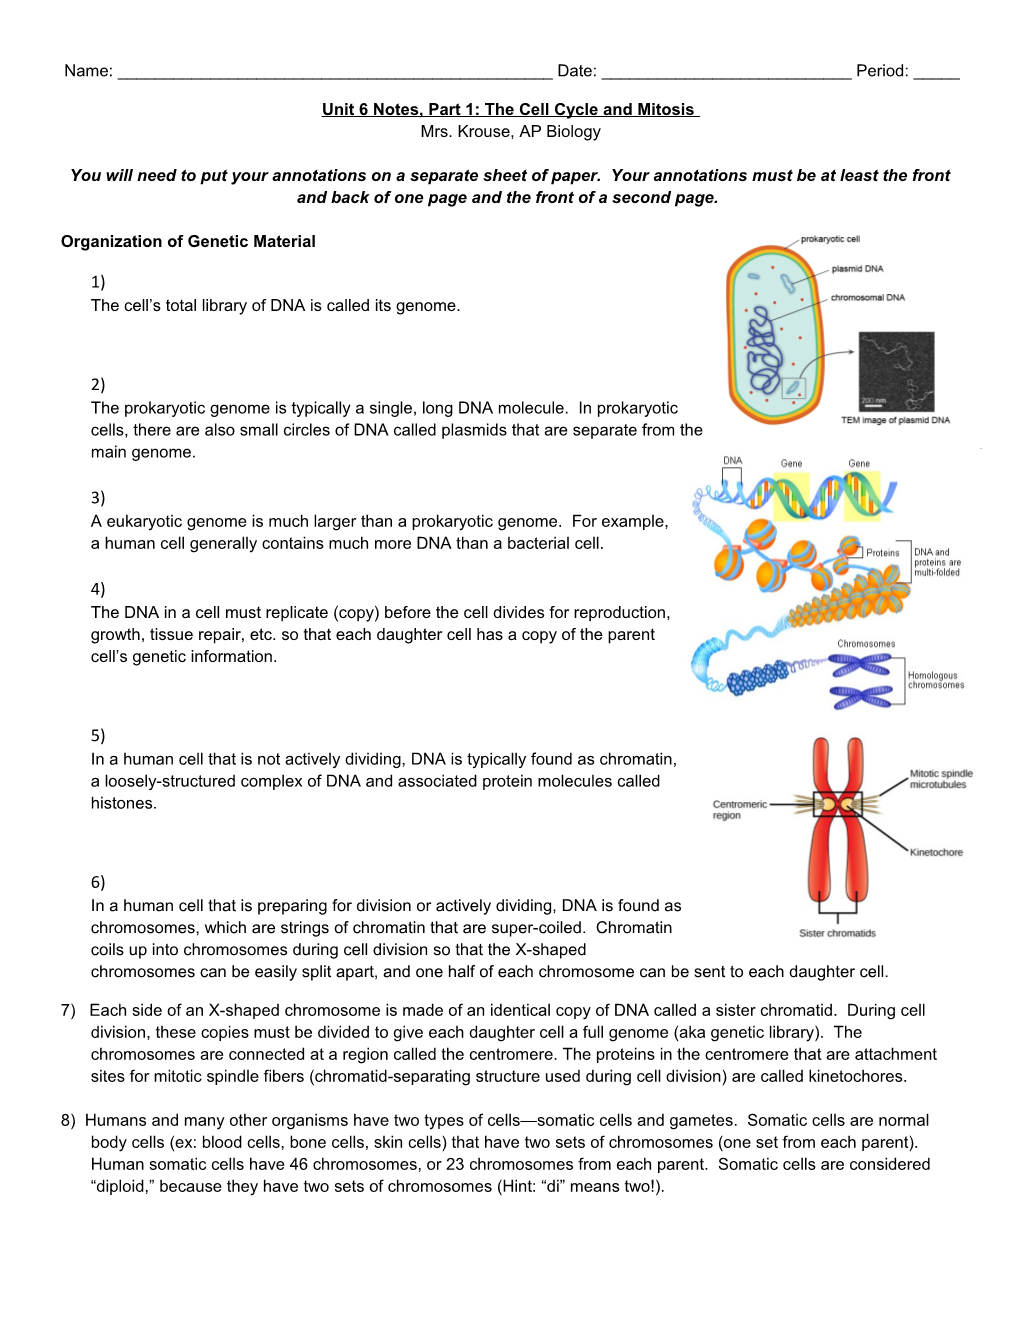 Unit 6 Notes, Part 1: the Cell Cycle and Mitosis